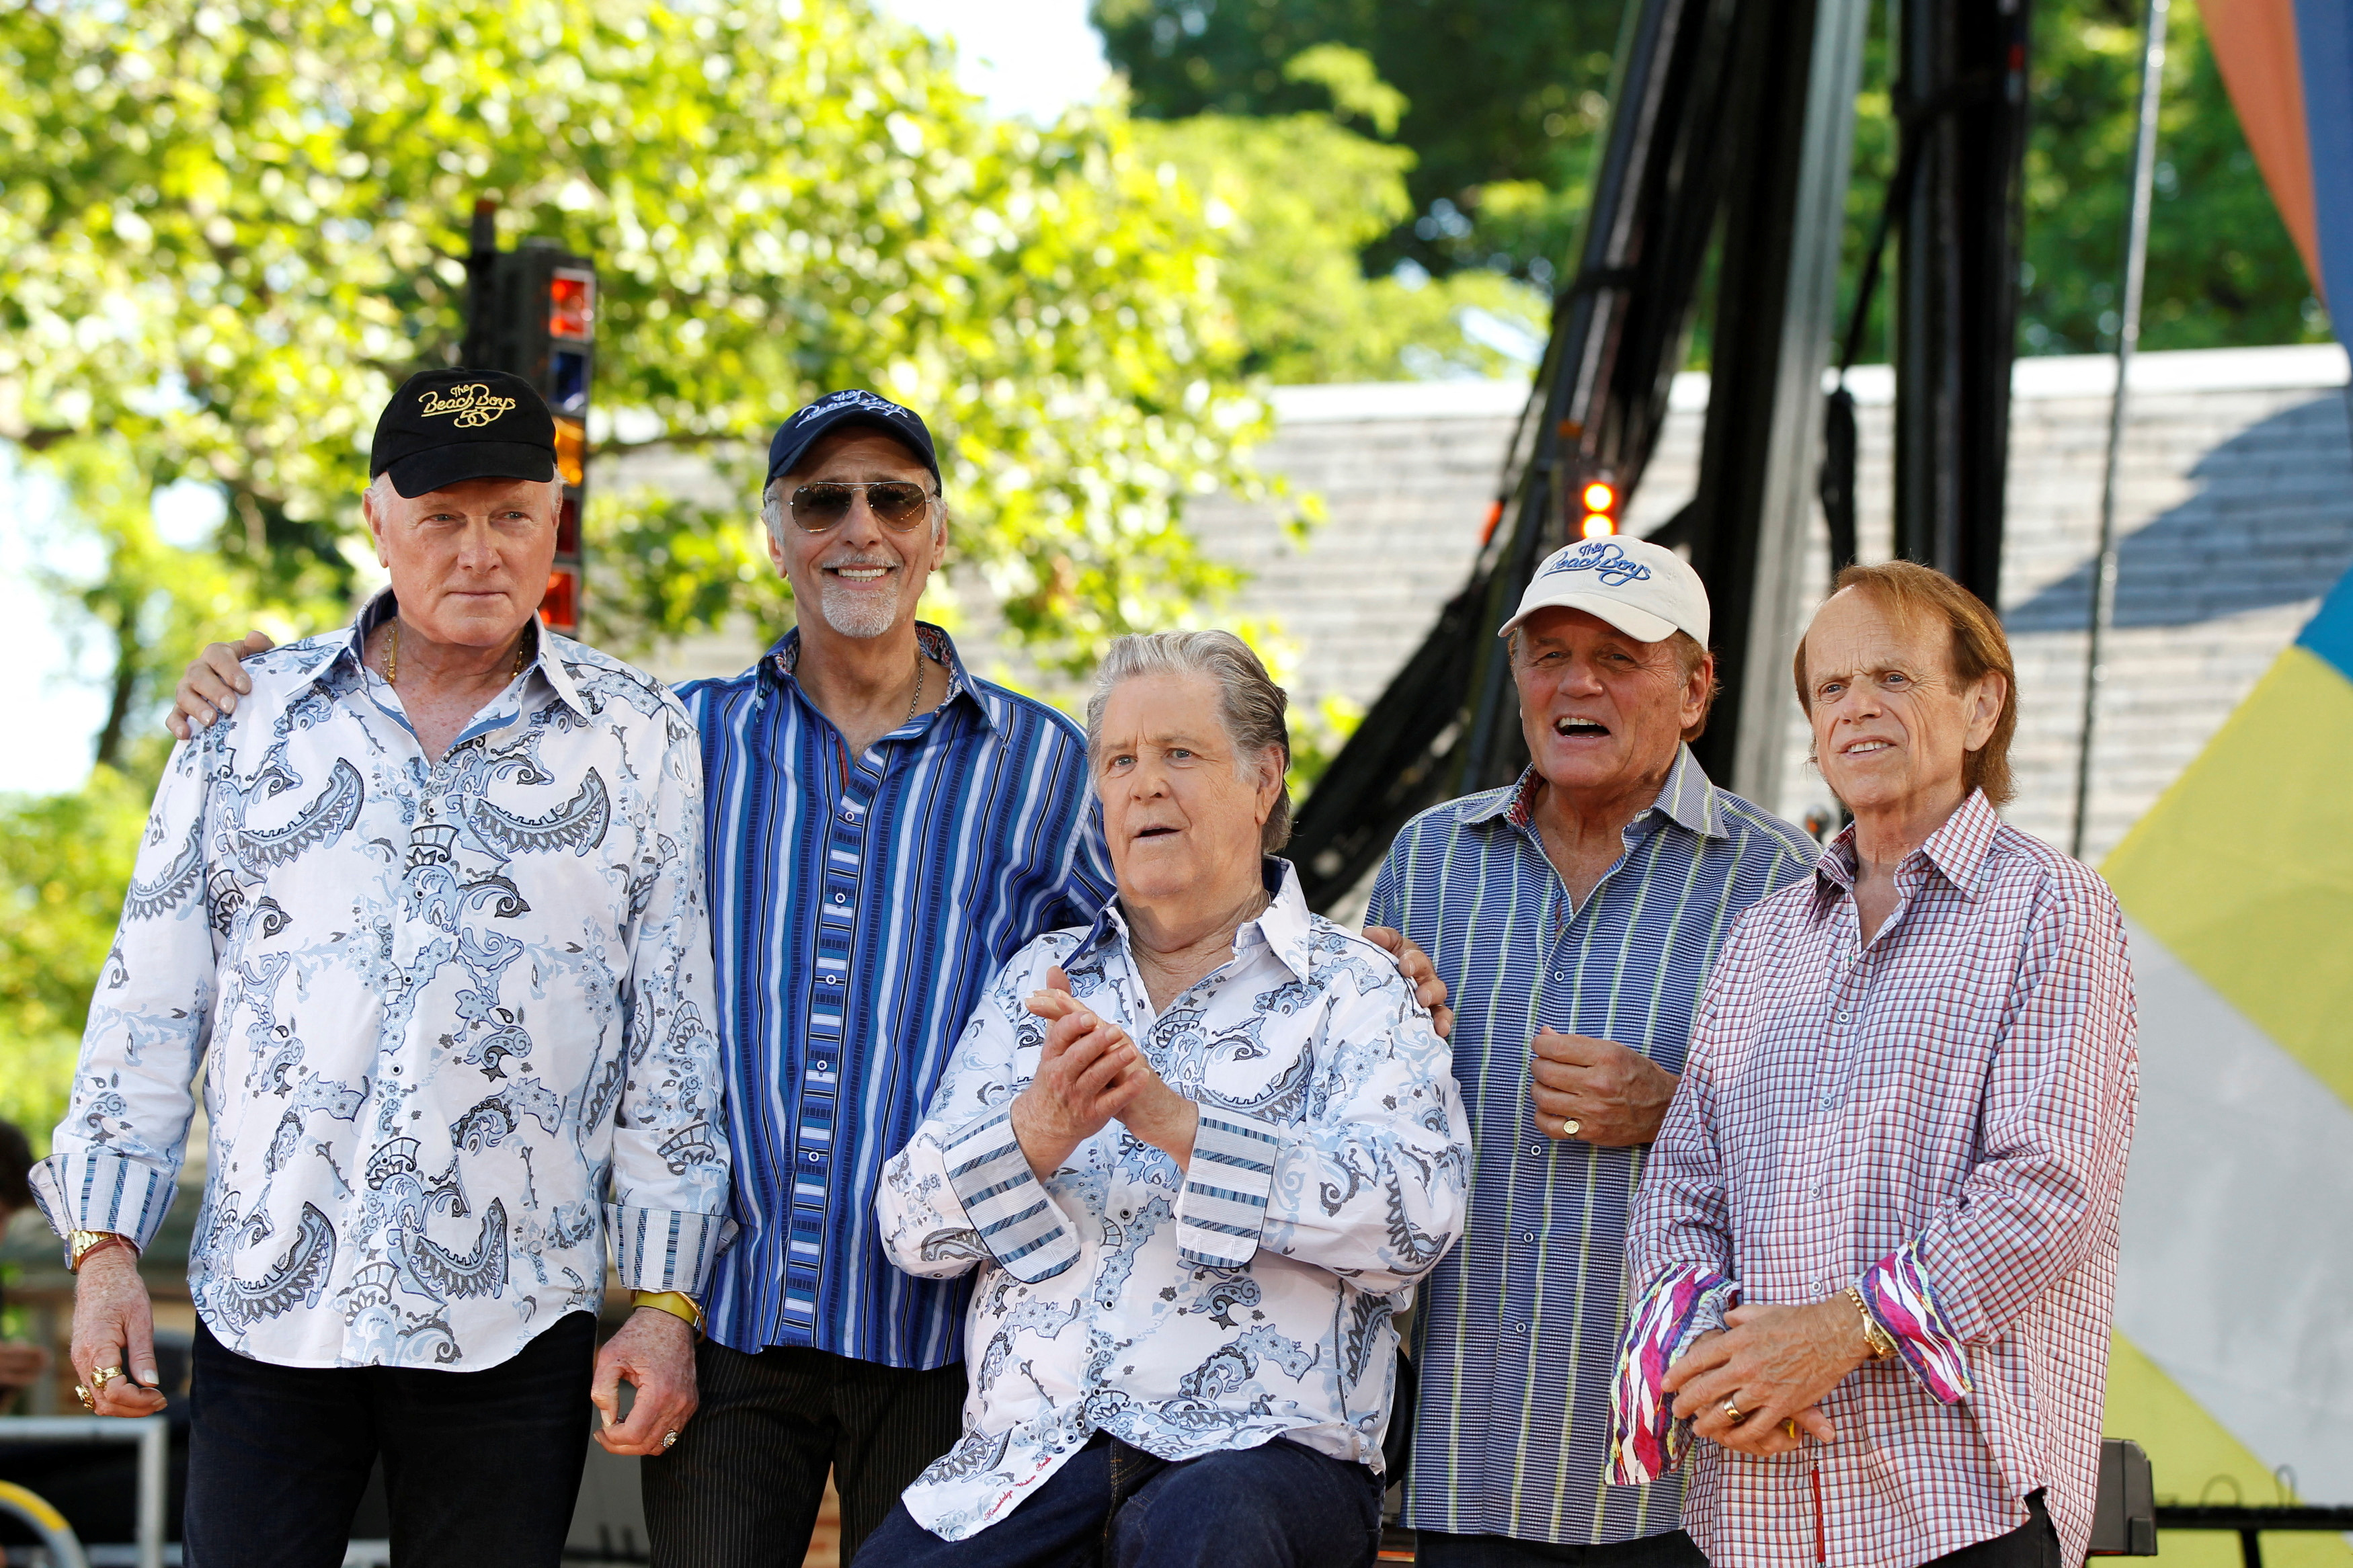 Members of Beach Boys pose for photo following a performance on ABC's Good Morning America in New York's Central Park